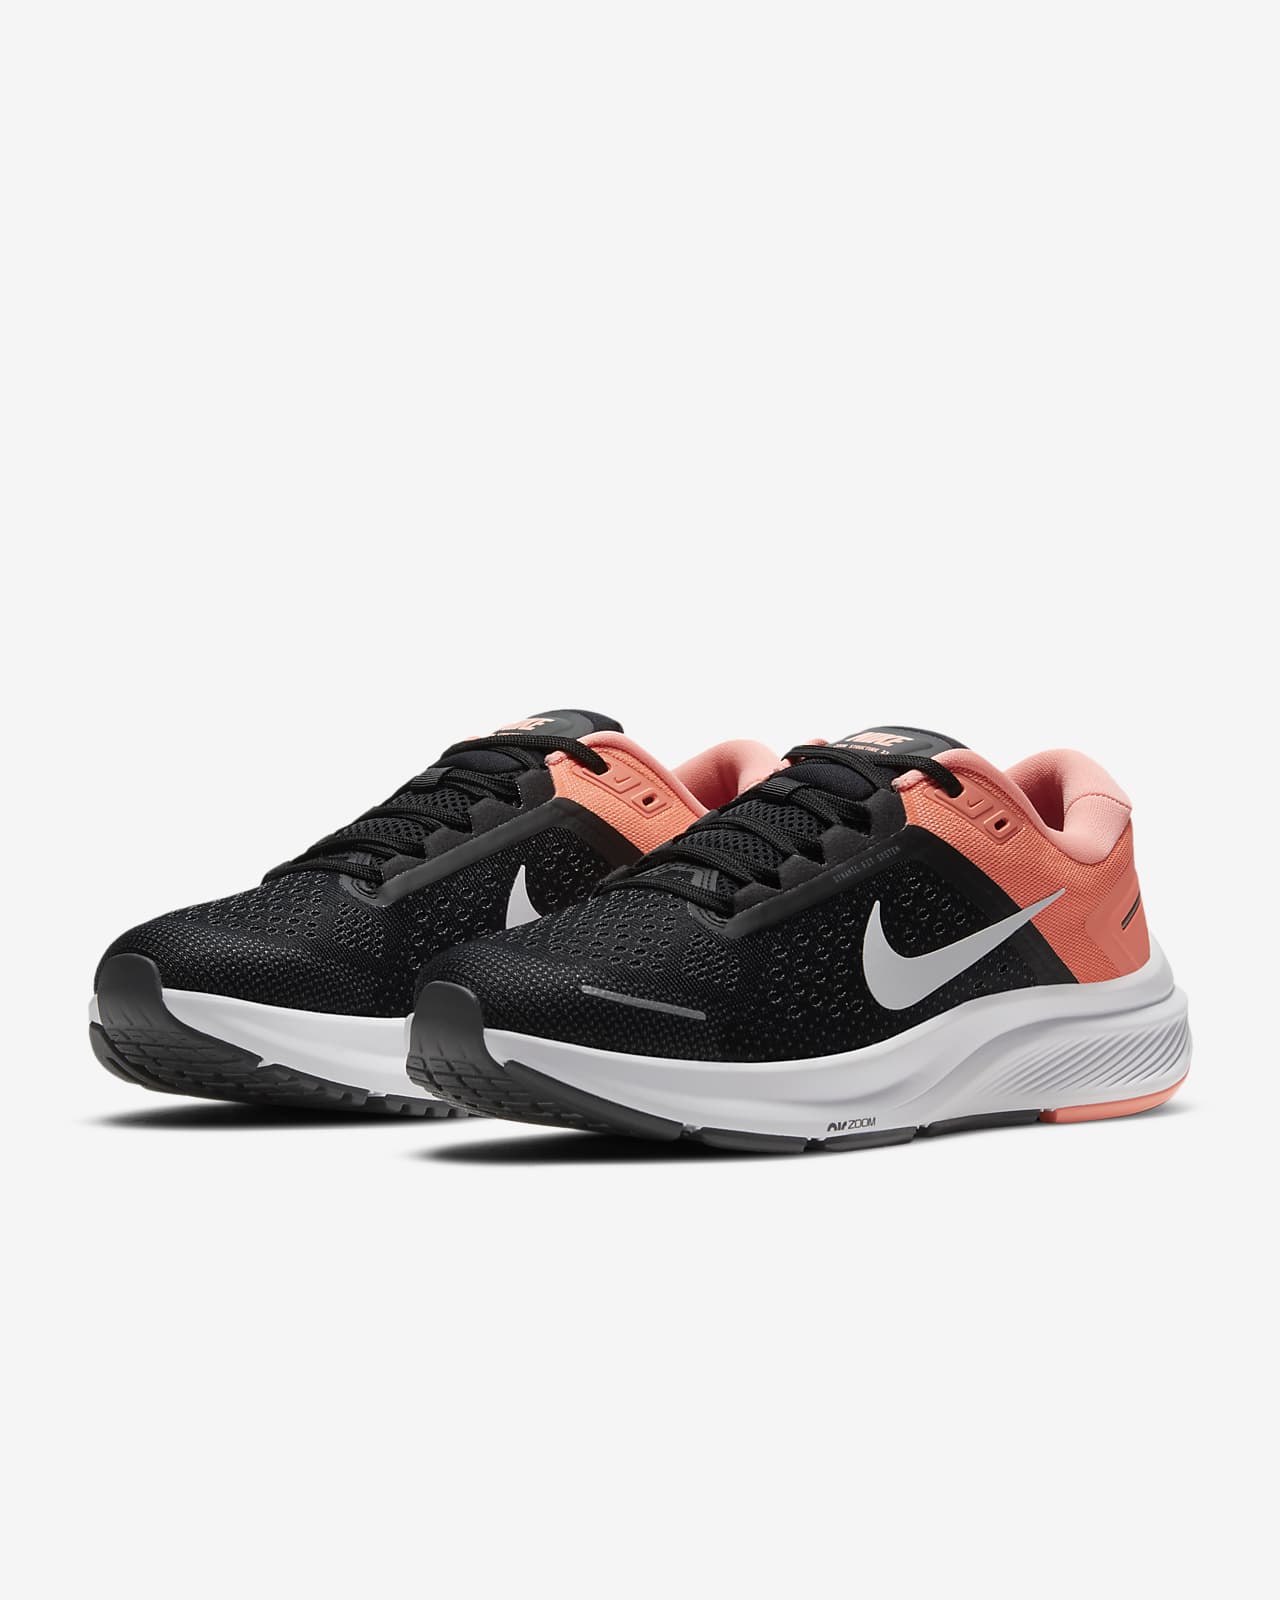 nike structure 19 womens